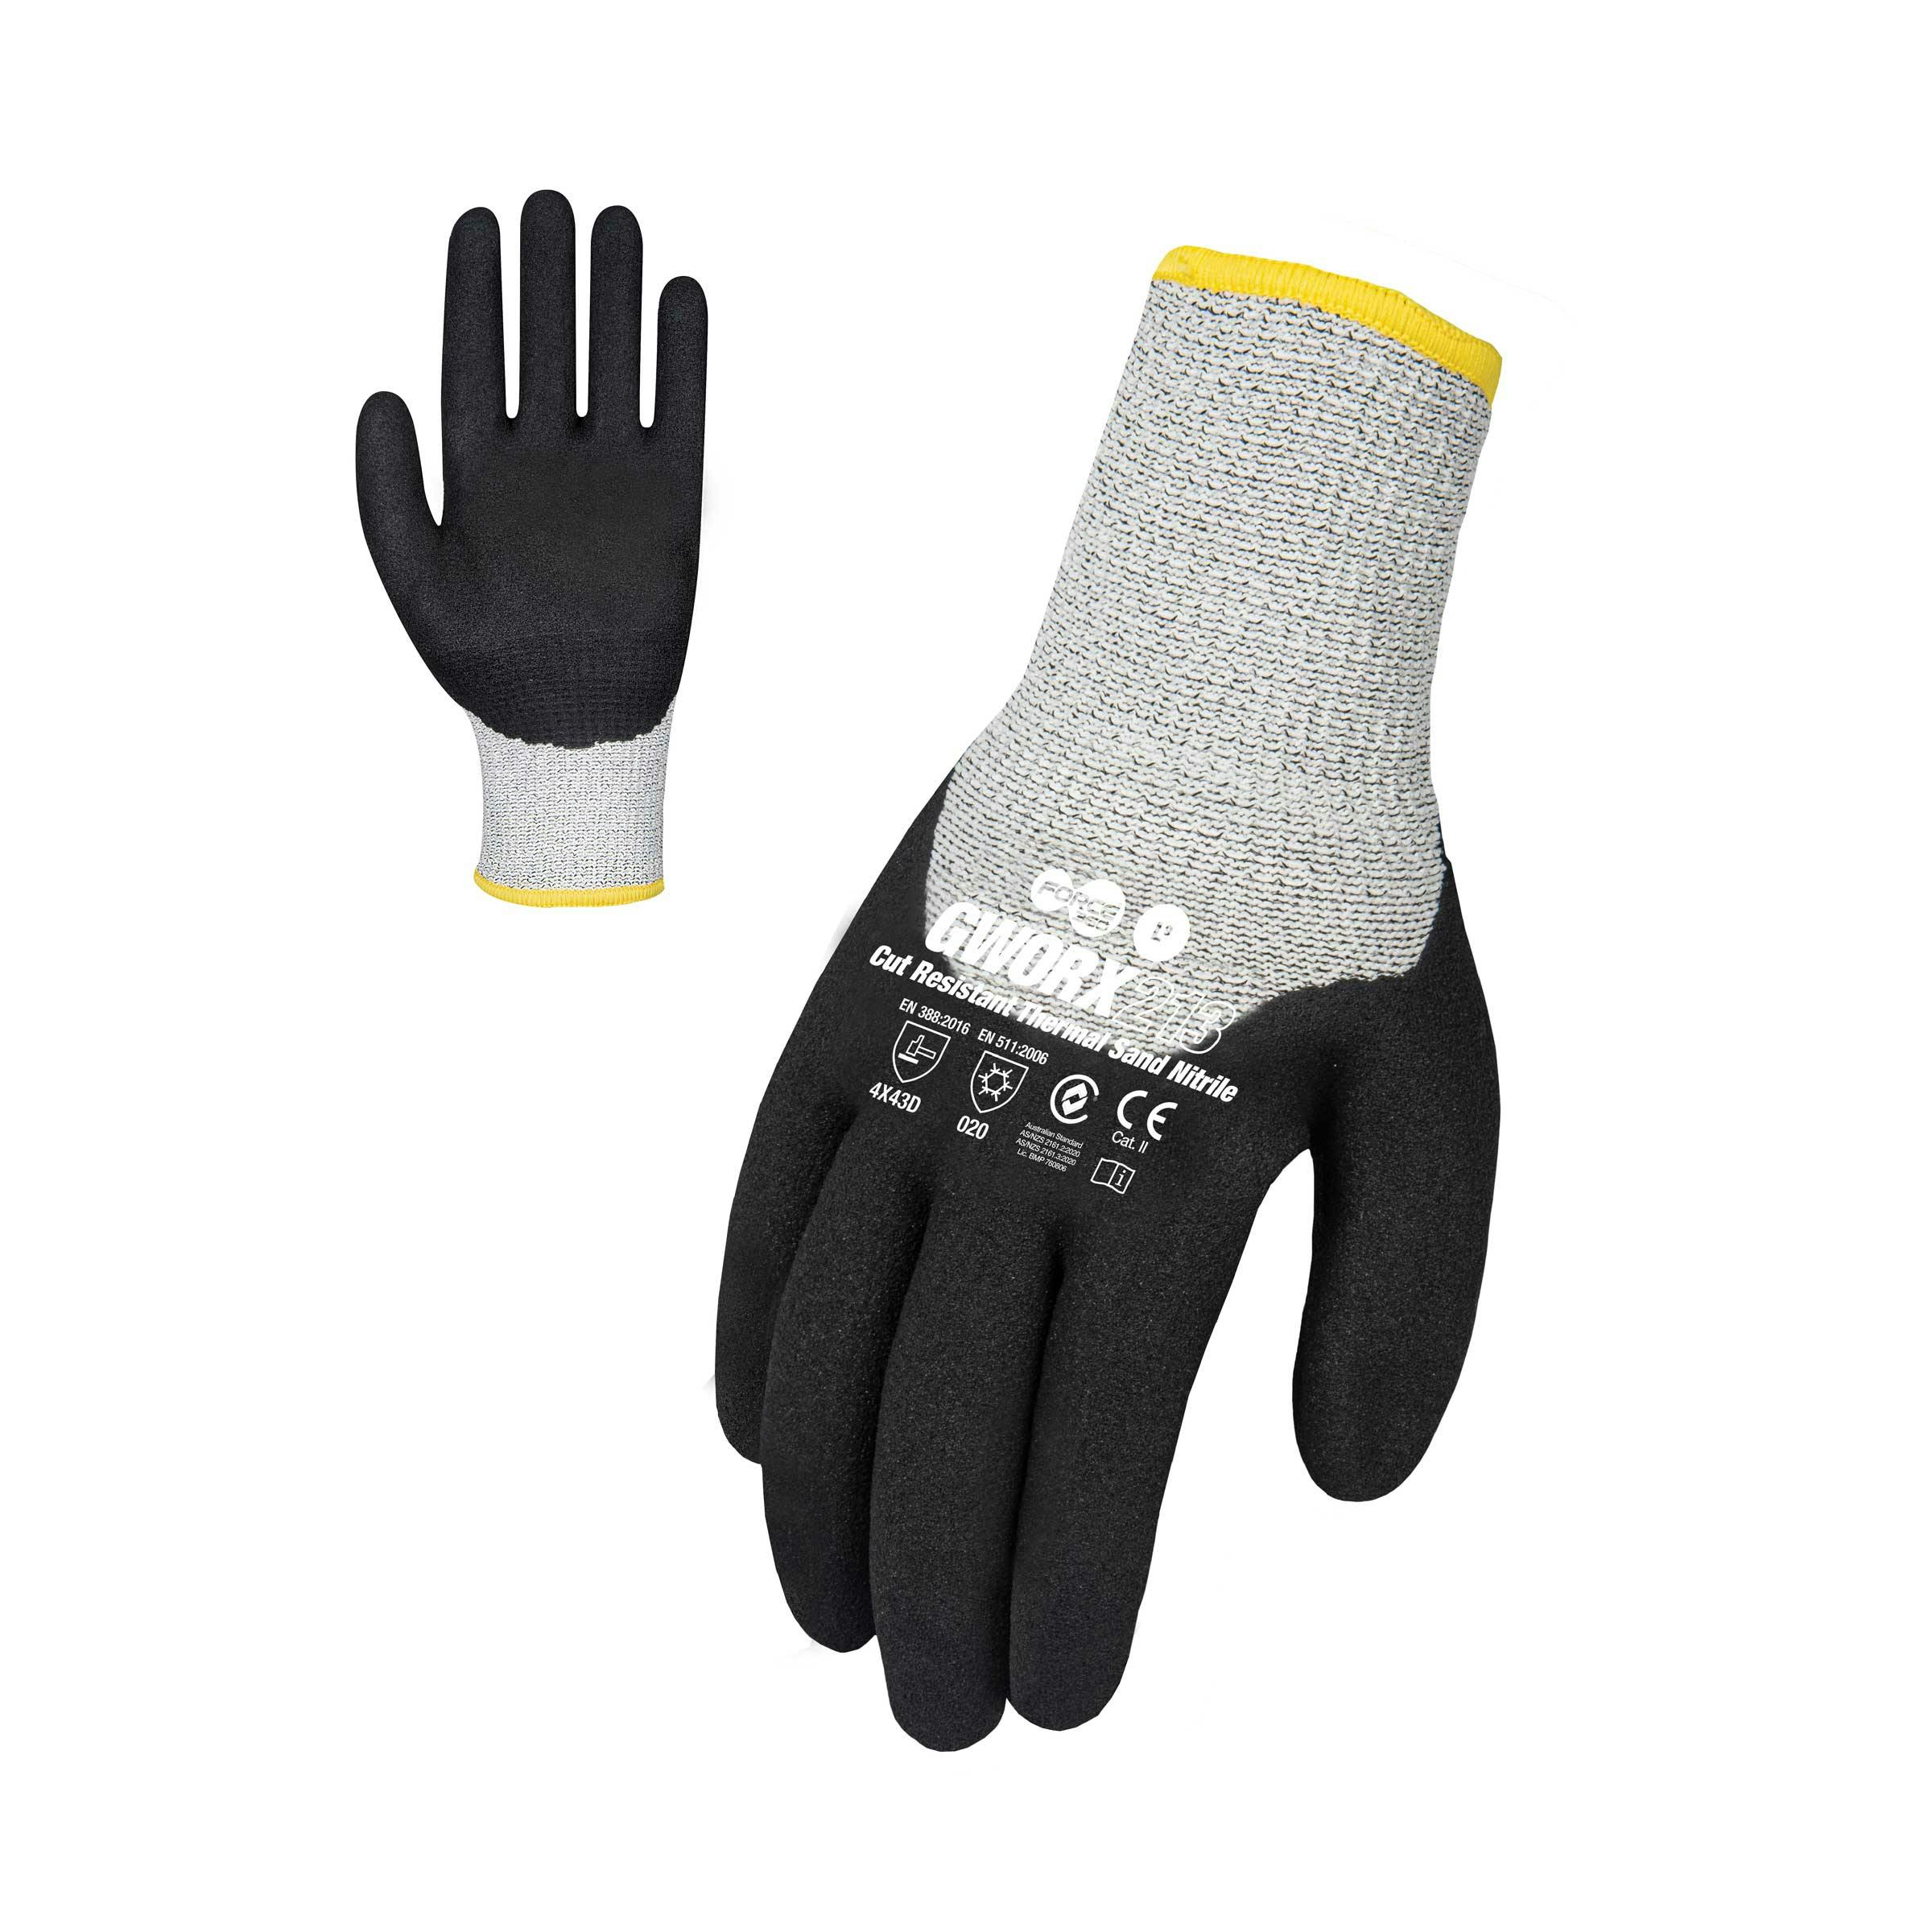 Force360 Worx Thermal Cut Level D Nitrile Glove